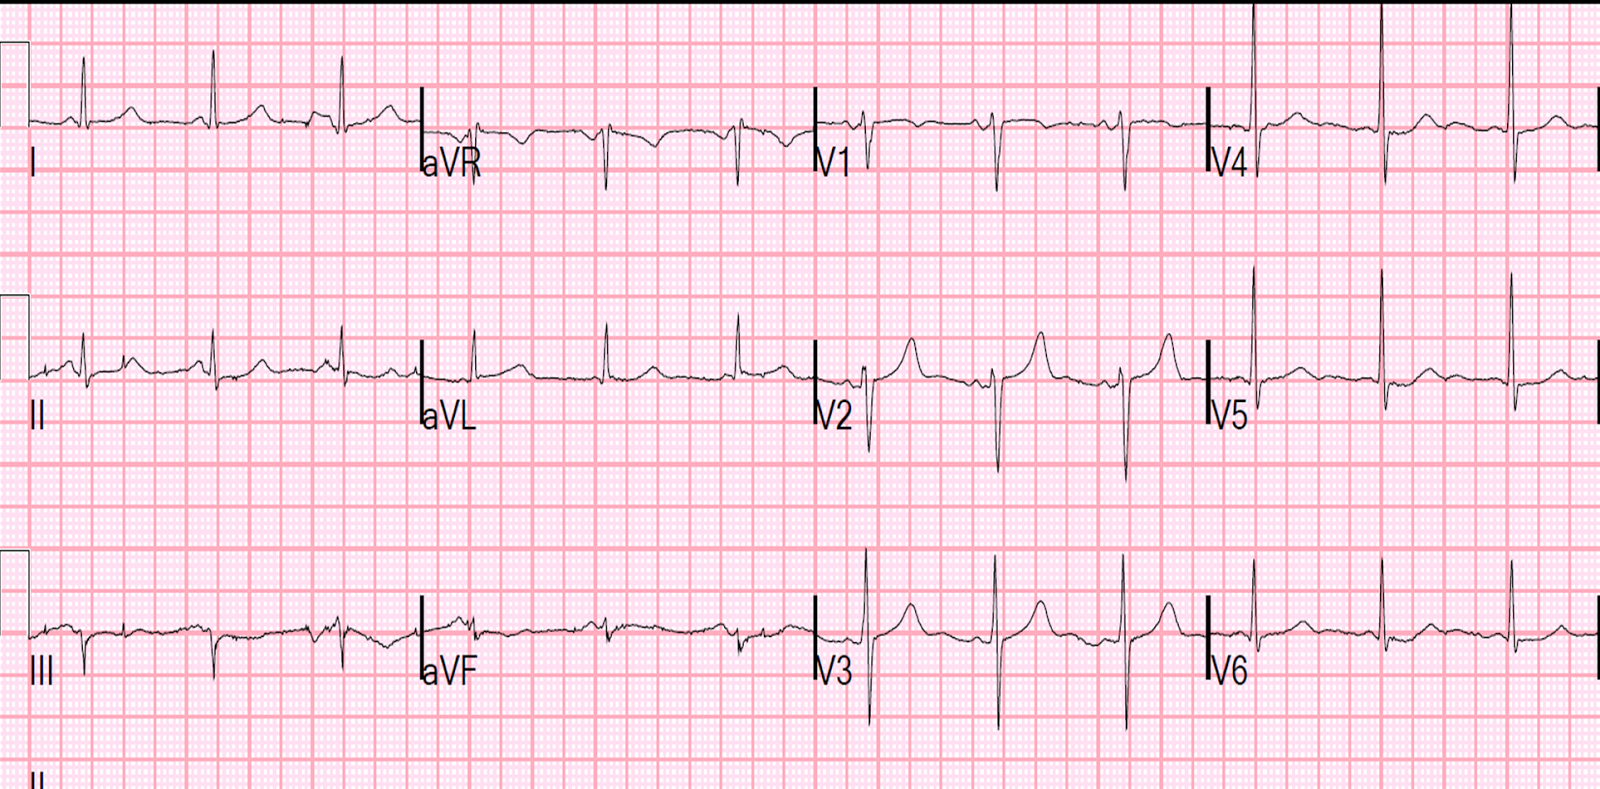 Dr. Smith's ECG Blog: A 50-something with severe chest pain and a